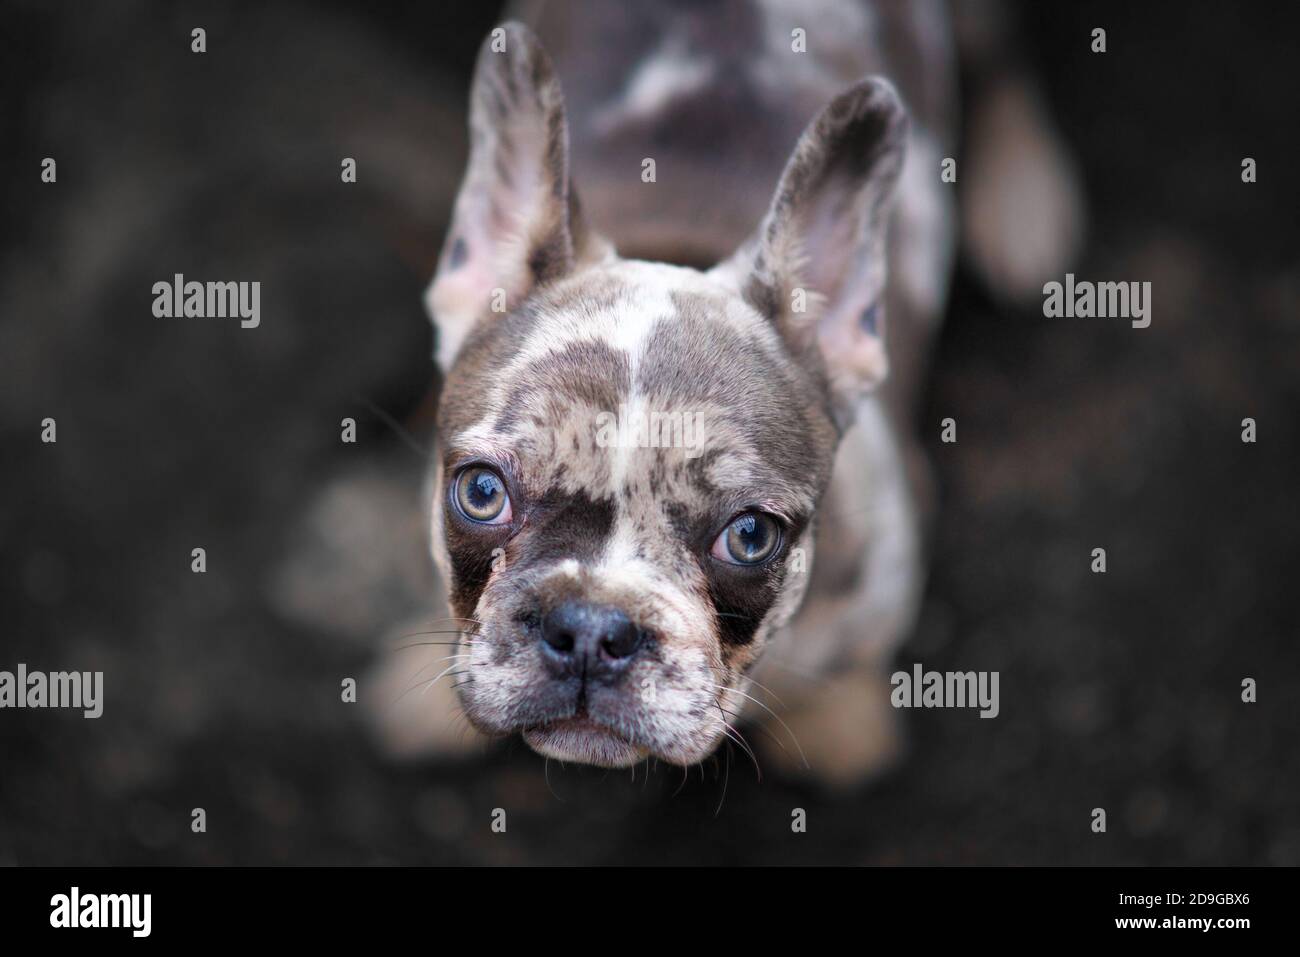 Young merle colored French Bulldog dog puppy with mottled patches looking up Stock Photo